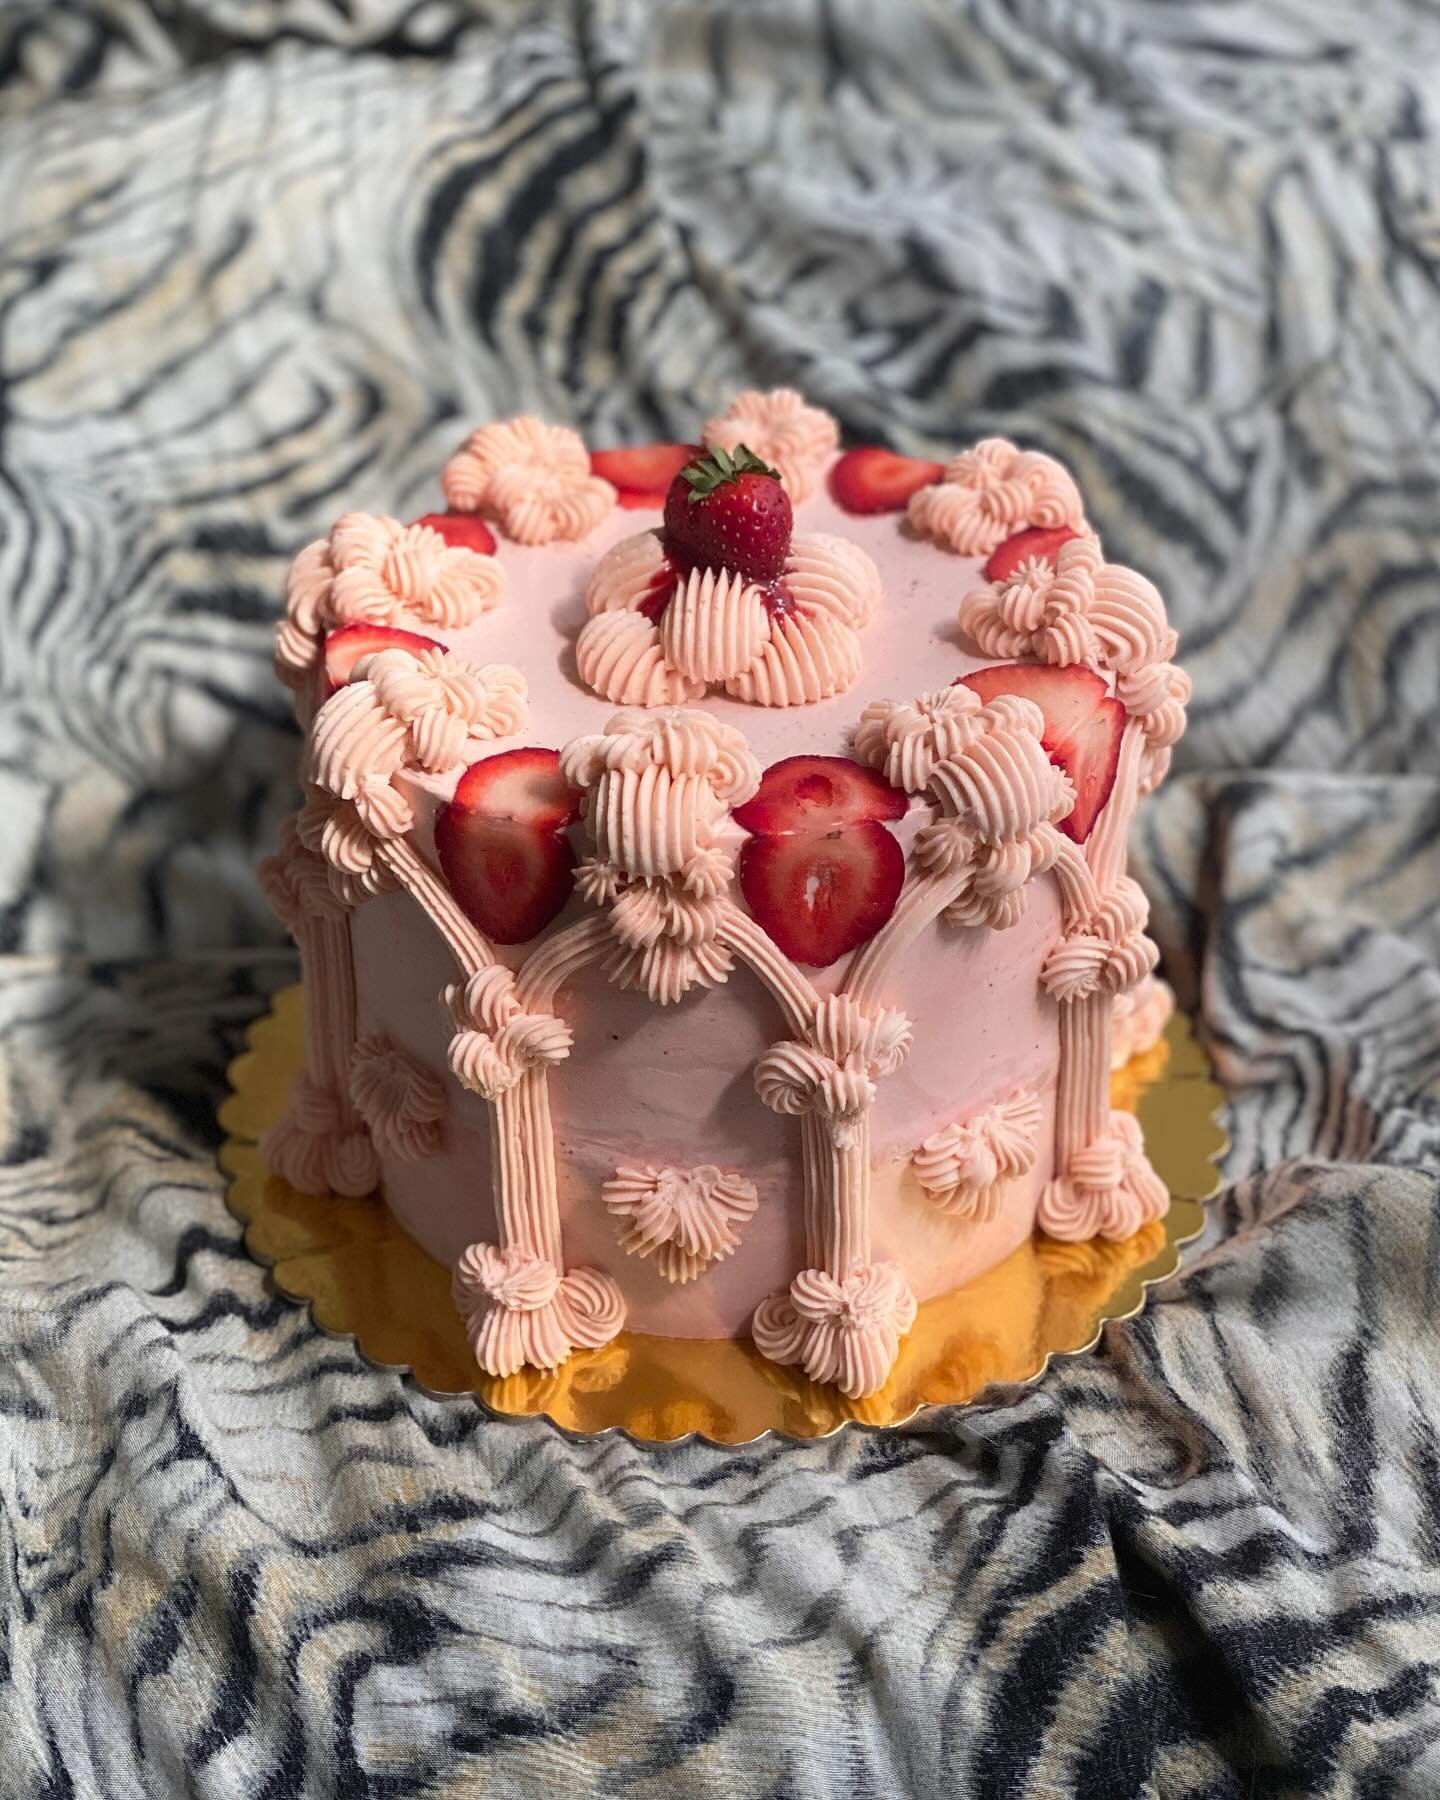 meet me at the strawberry arches &hearts;️🕊️🏹 commissioned by @chloembaloh for sara 🌸 chocolate millet chiffon soaked in strawberry clementine syrup, rhubarb strawberry jelly, dark chocolate whipped cream, strawberries macerated in sugar and cleme